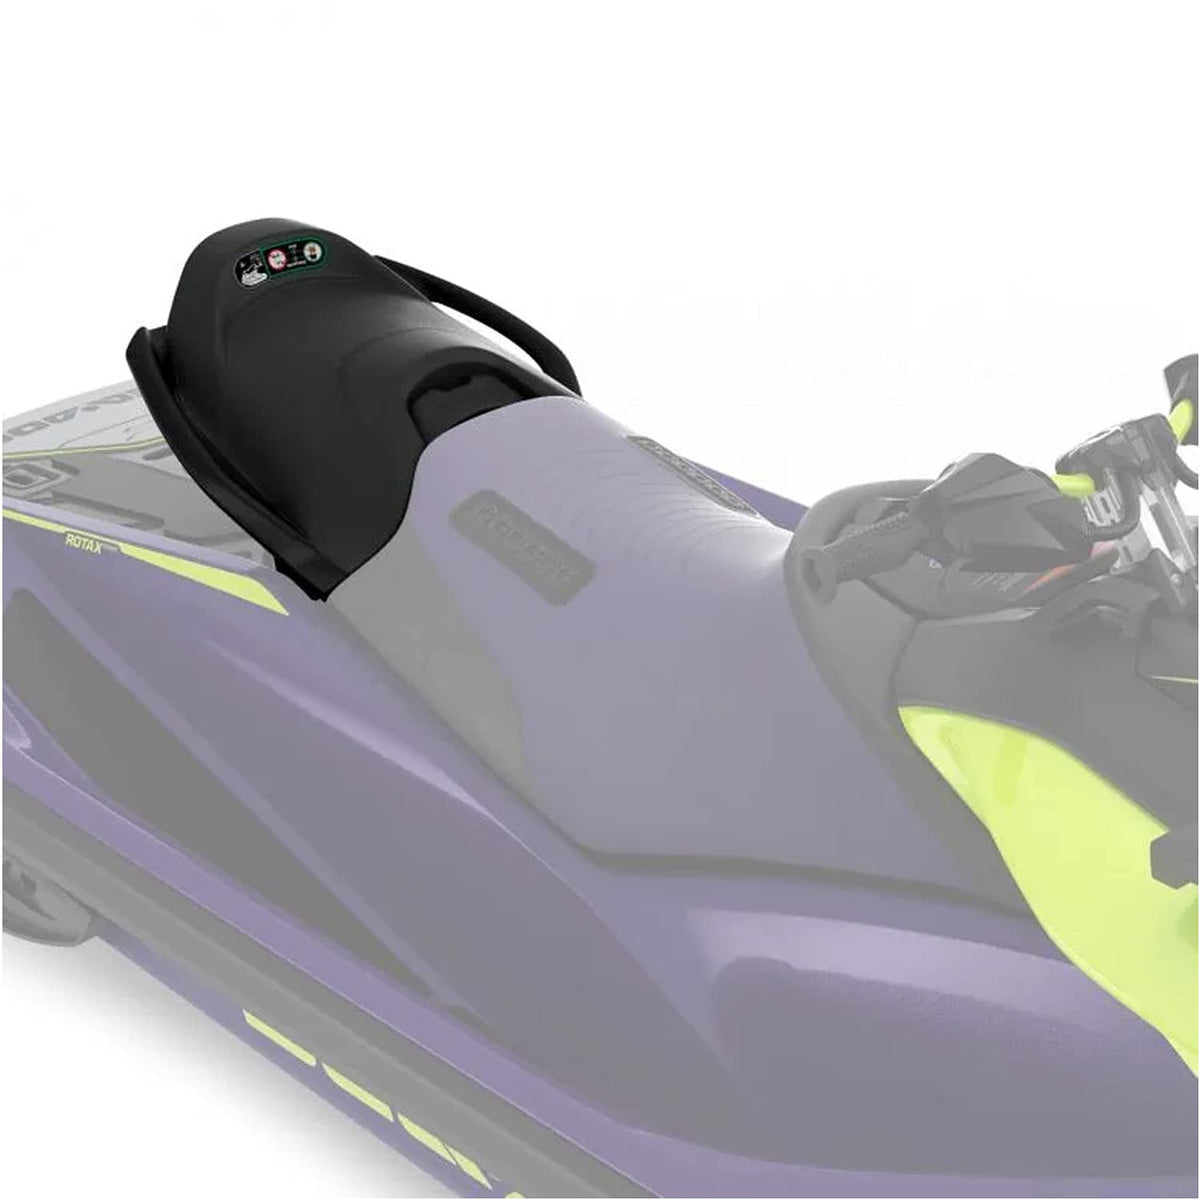 Sea-Doo New OEM, 2021 RXP-X Passenger Seat With Two Grab Options, 295100923